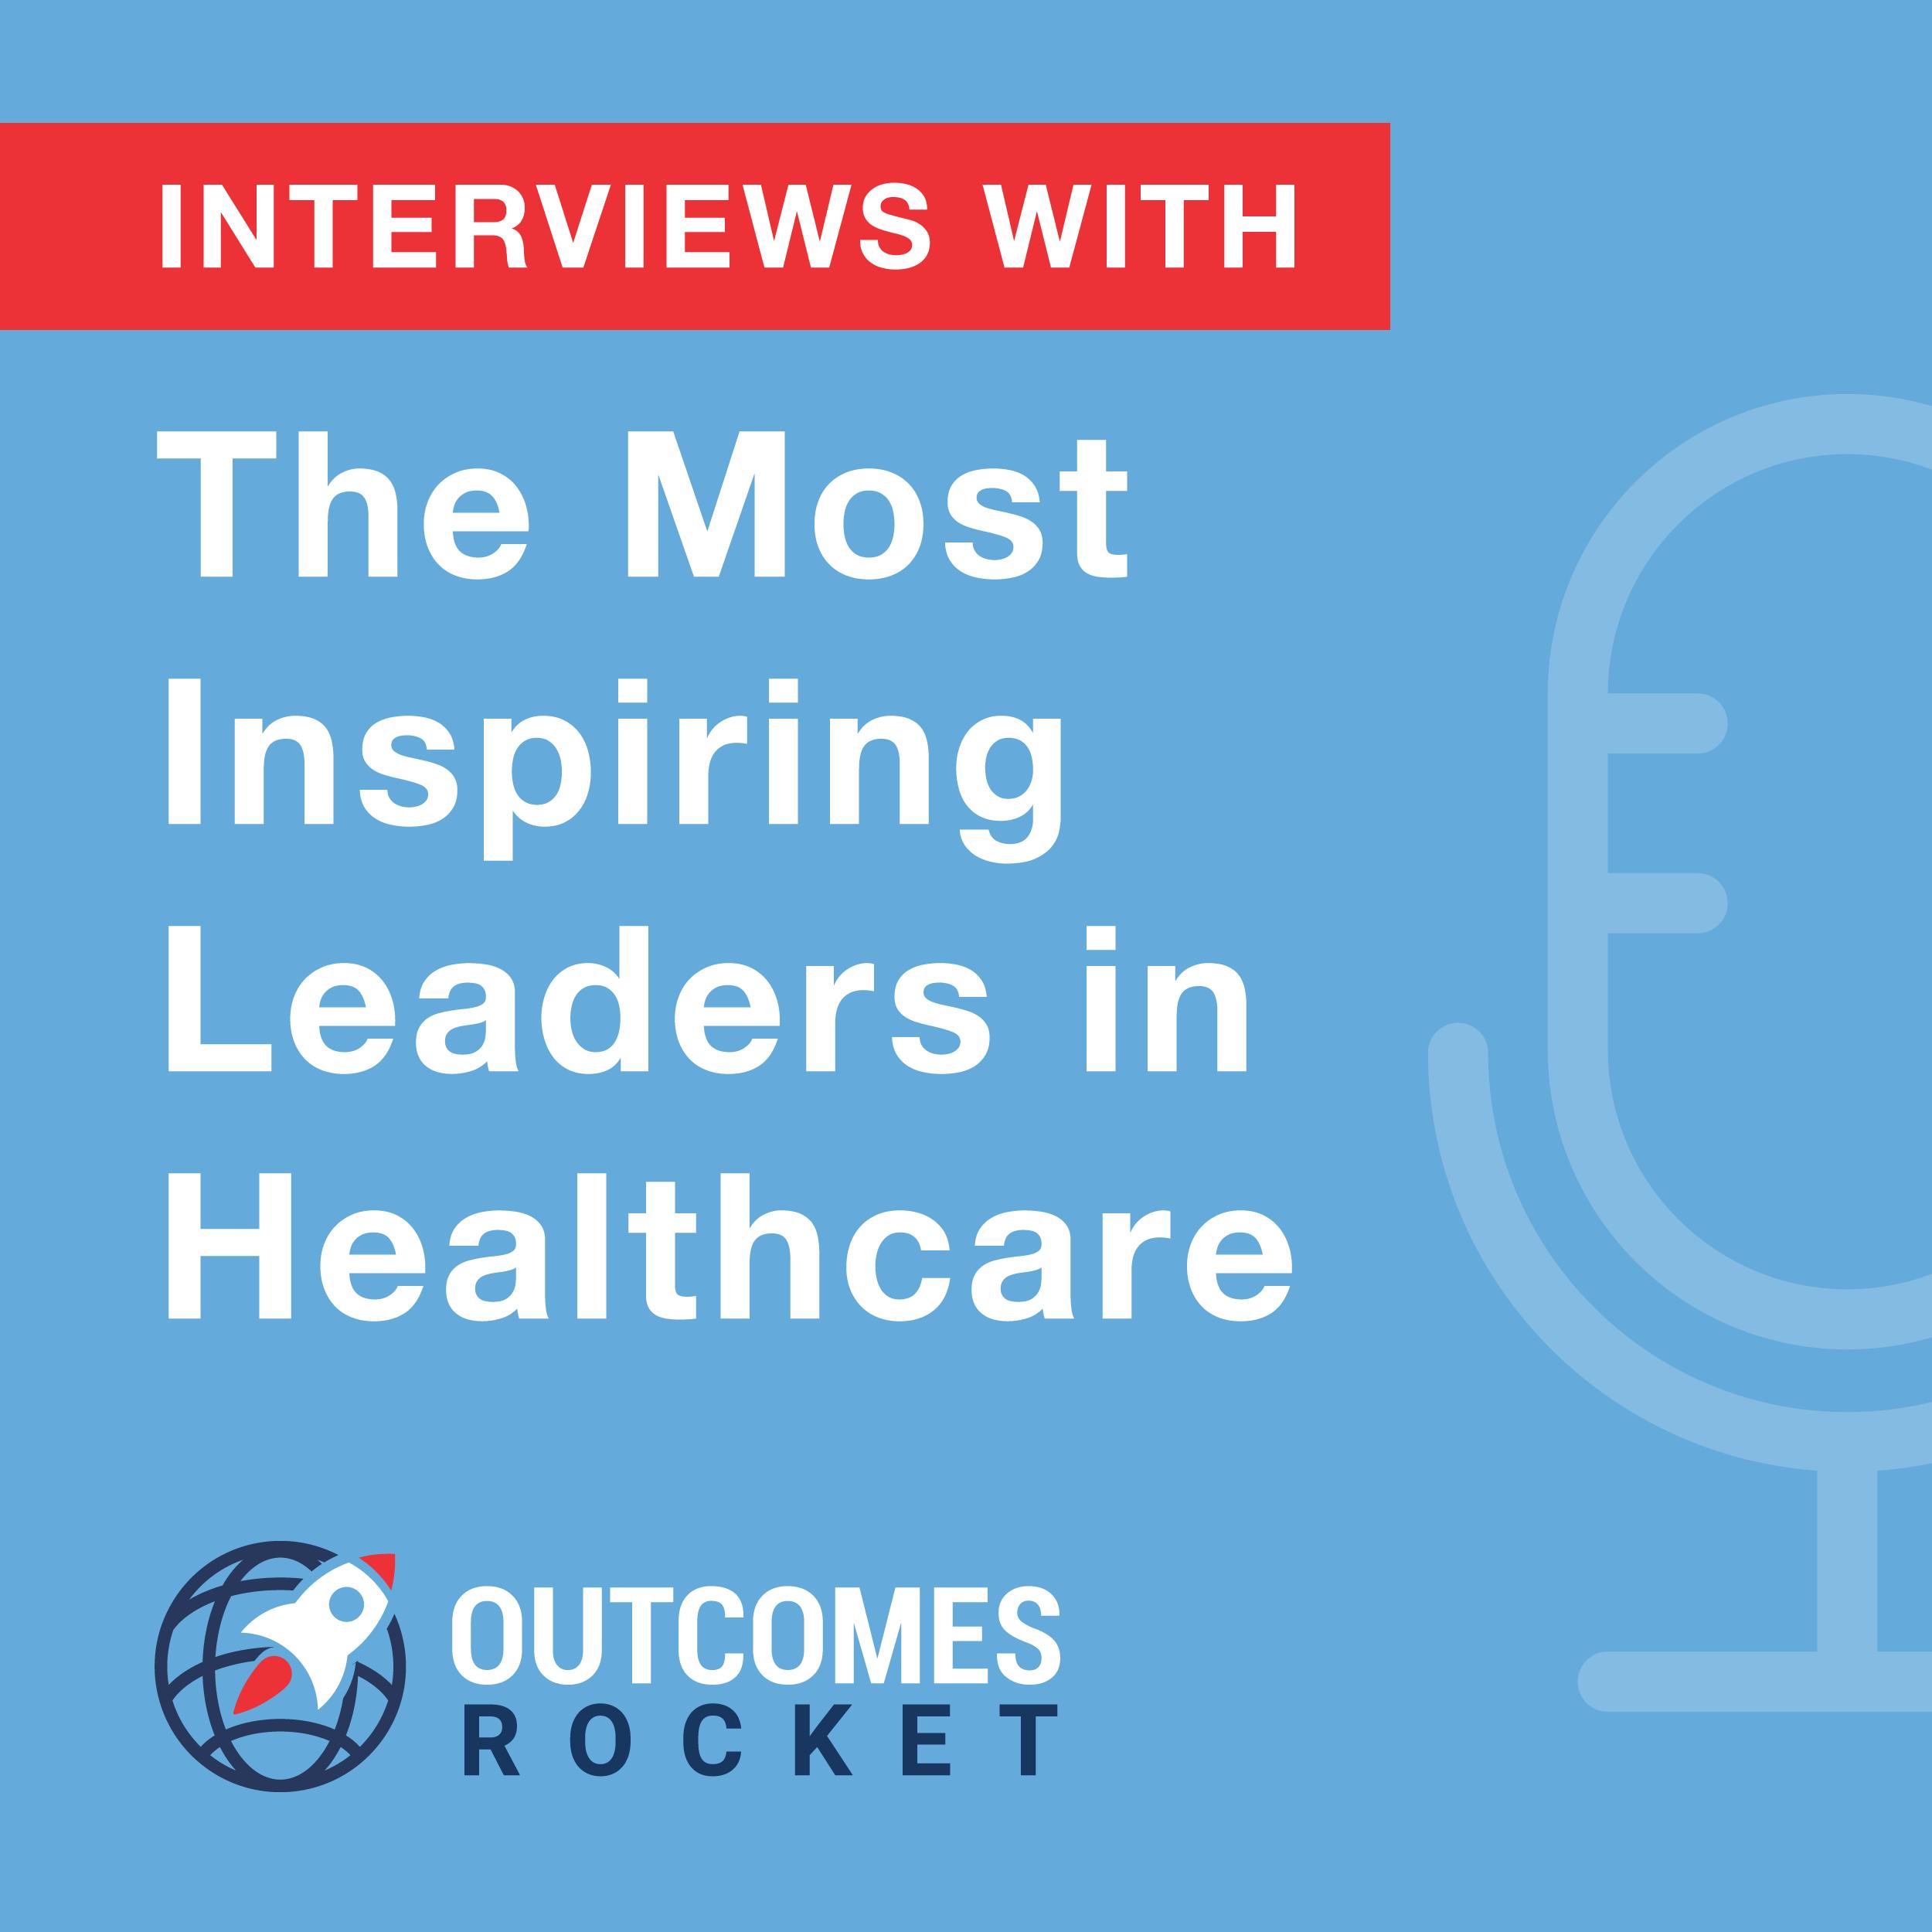 ENCORE: Why Health Leaders Must Seriously Consider Social Determinants of Health with Lisa Suennen, Venture Capital Partner, Industry Consultant, Operations Leader